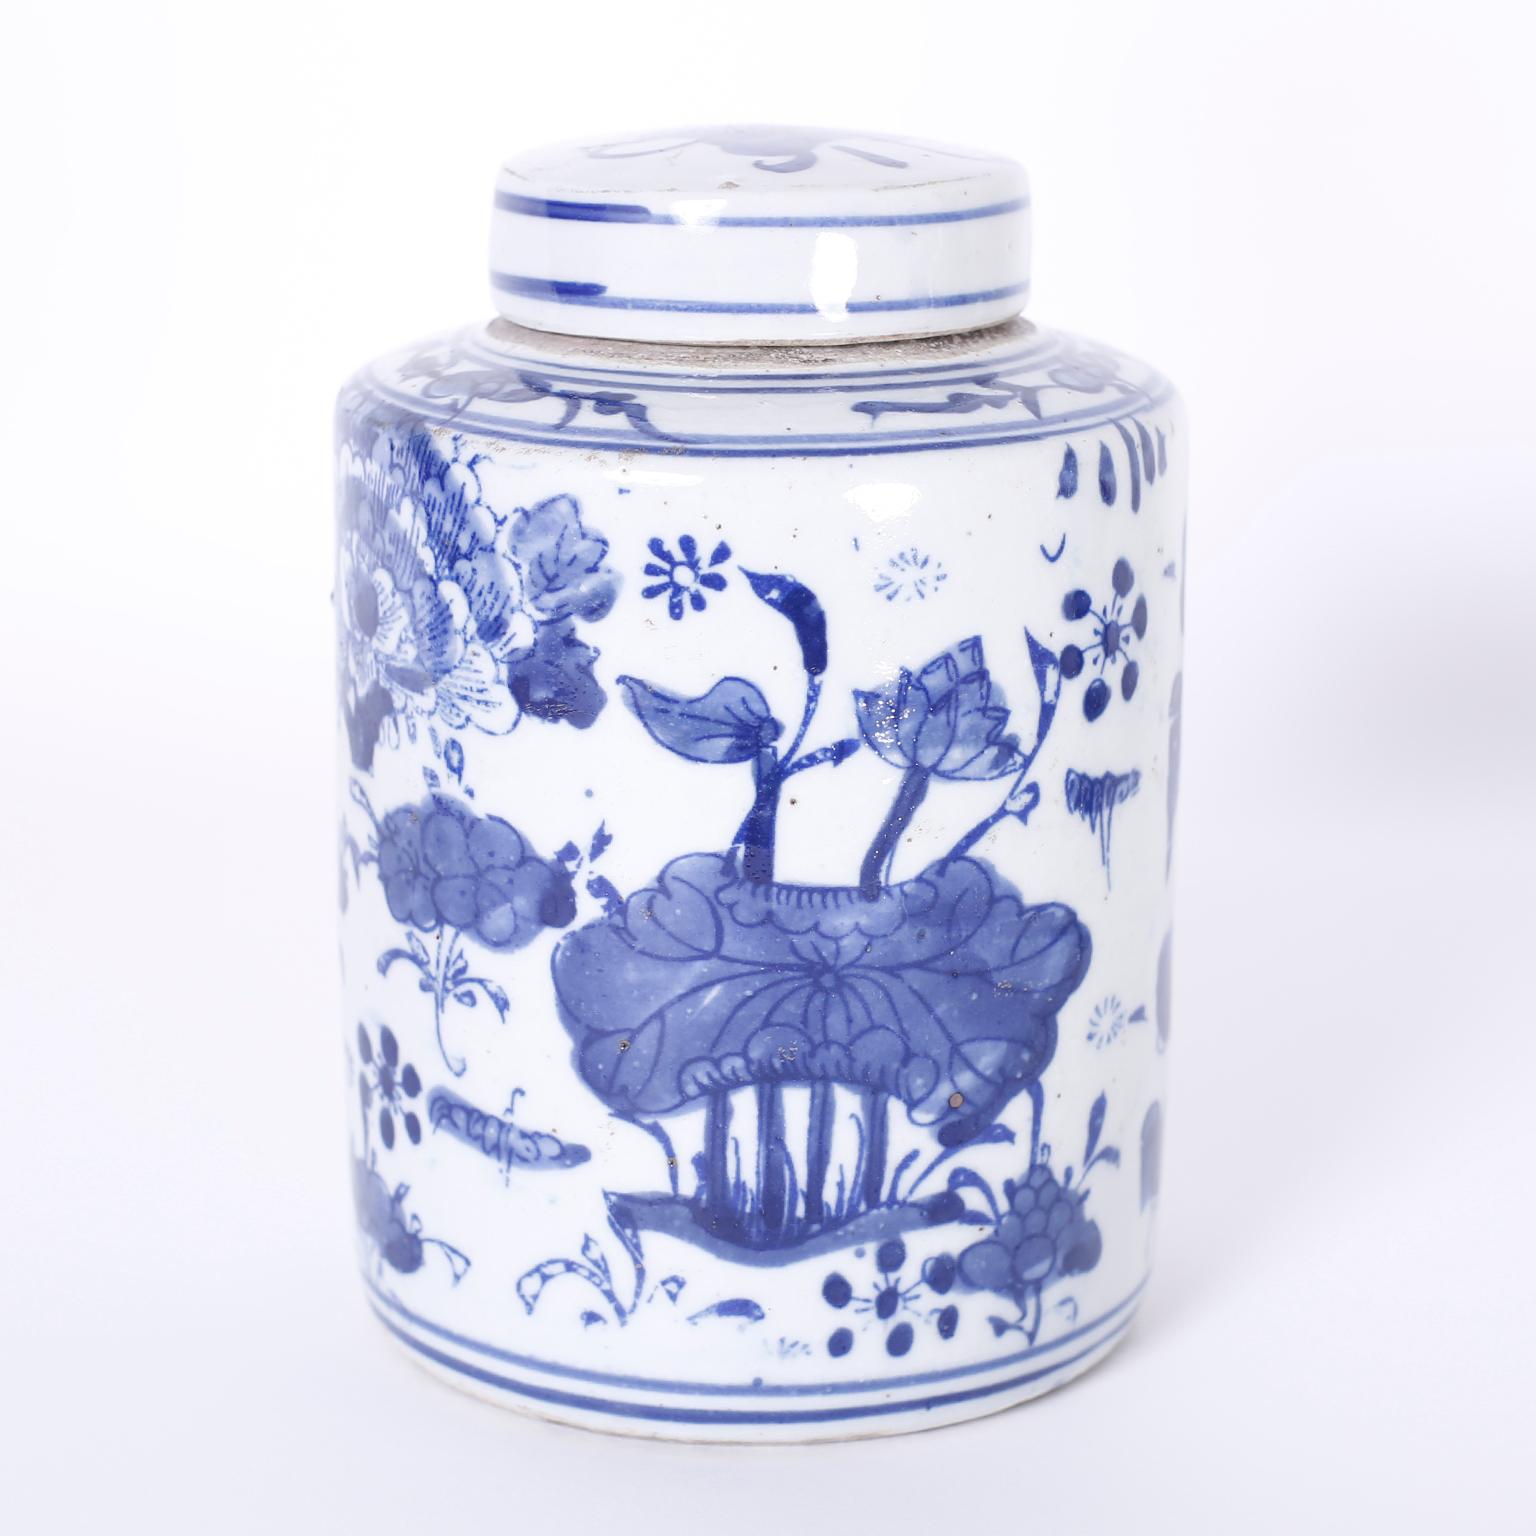 Chinese Pair of Blue and White Porcelain Tea Caddies or Canisters